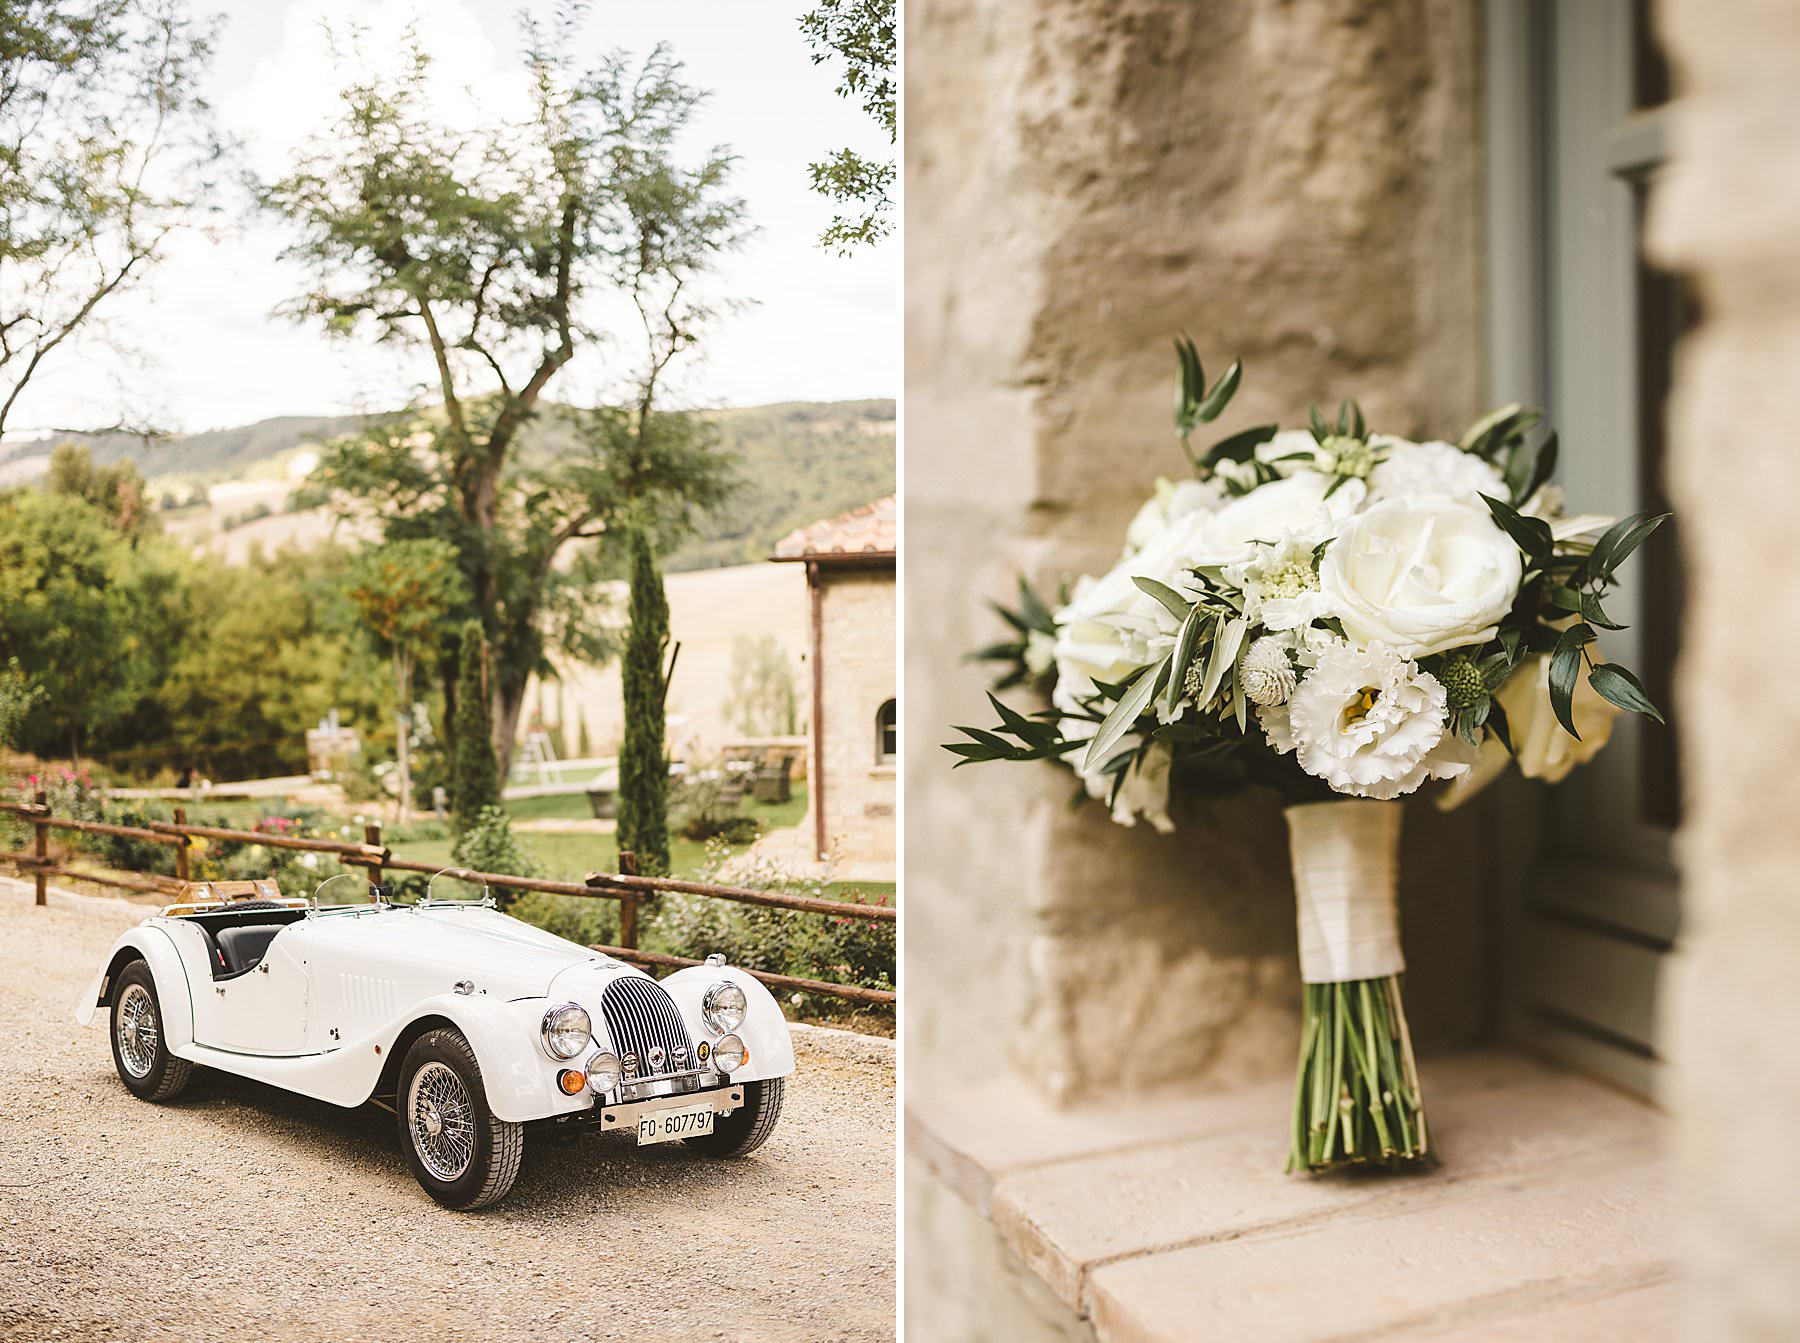 Morgan vintage car at Borgo Pignano private villa for timeless elopement wedding in the heart of Tuscany